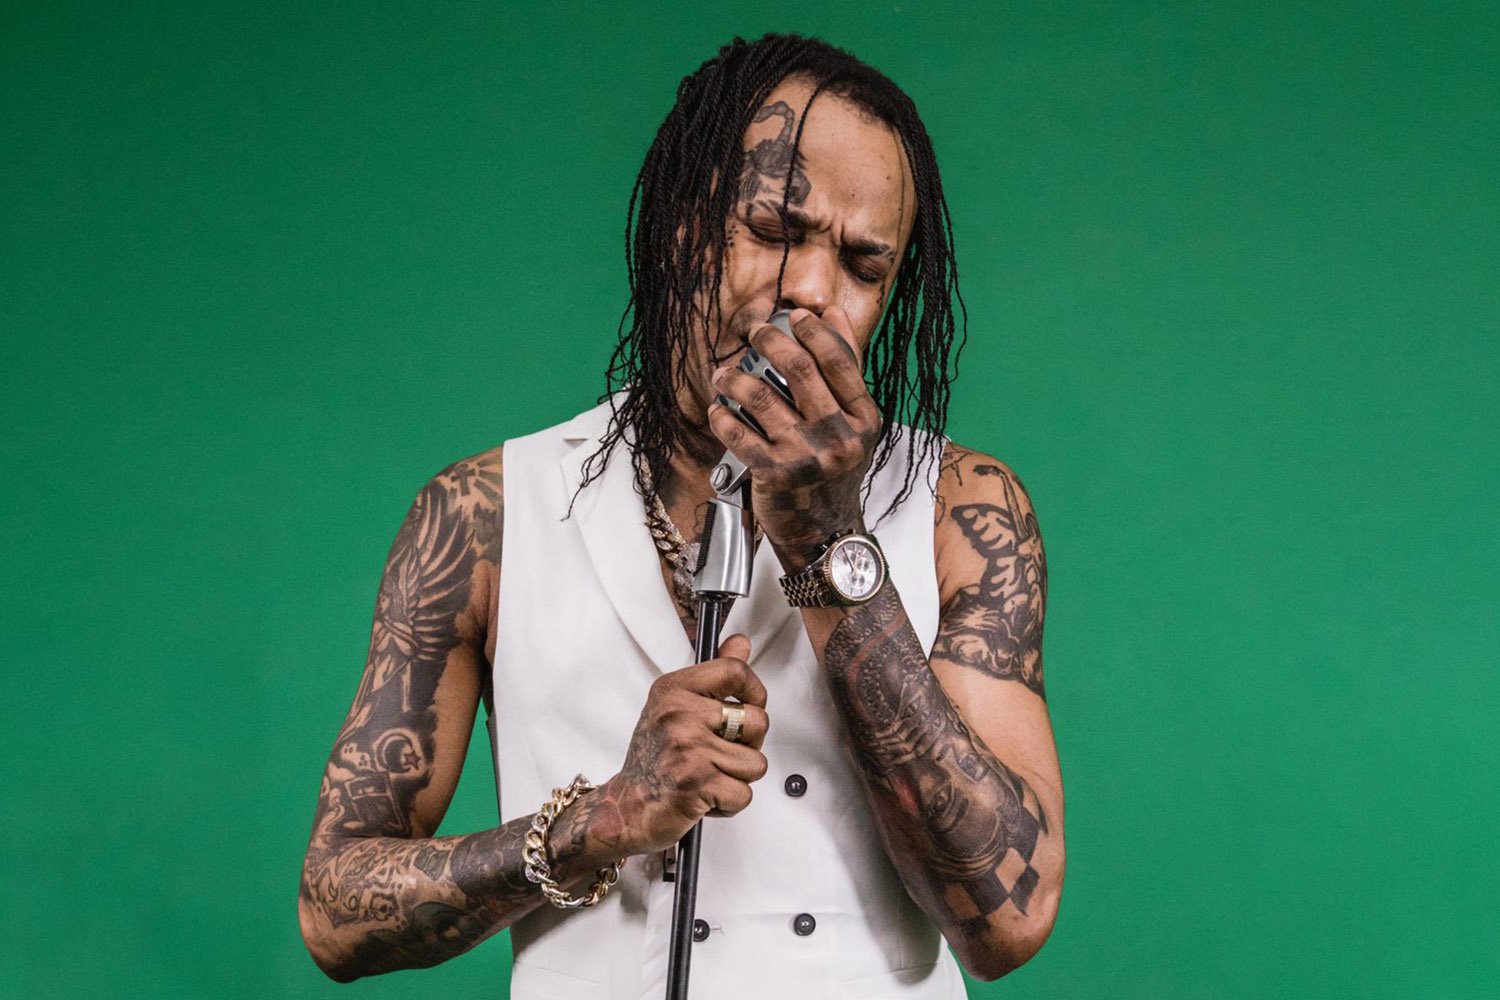 Tommy Lee Sparta Released From Prison - DancehallMag